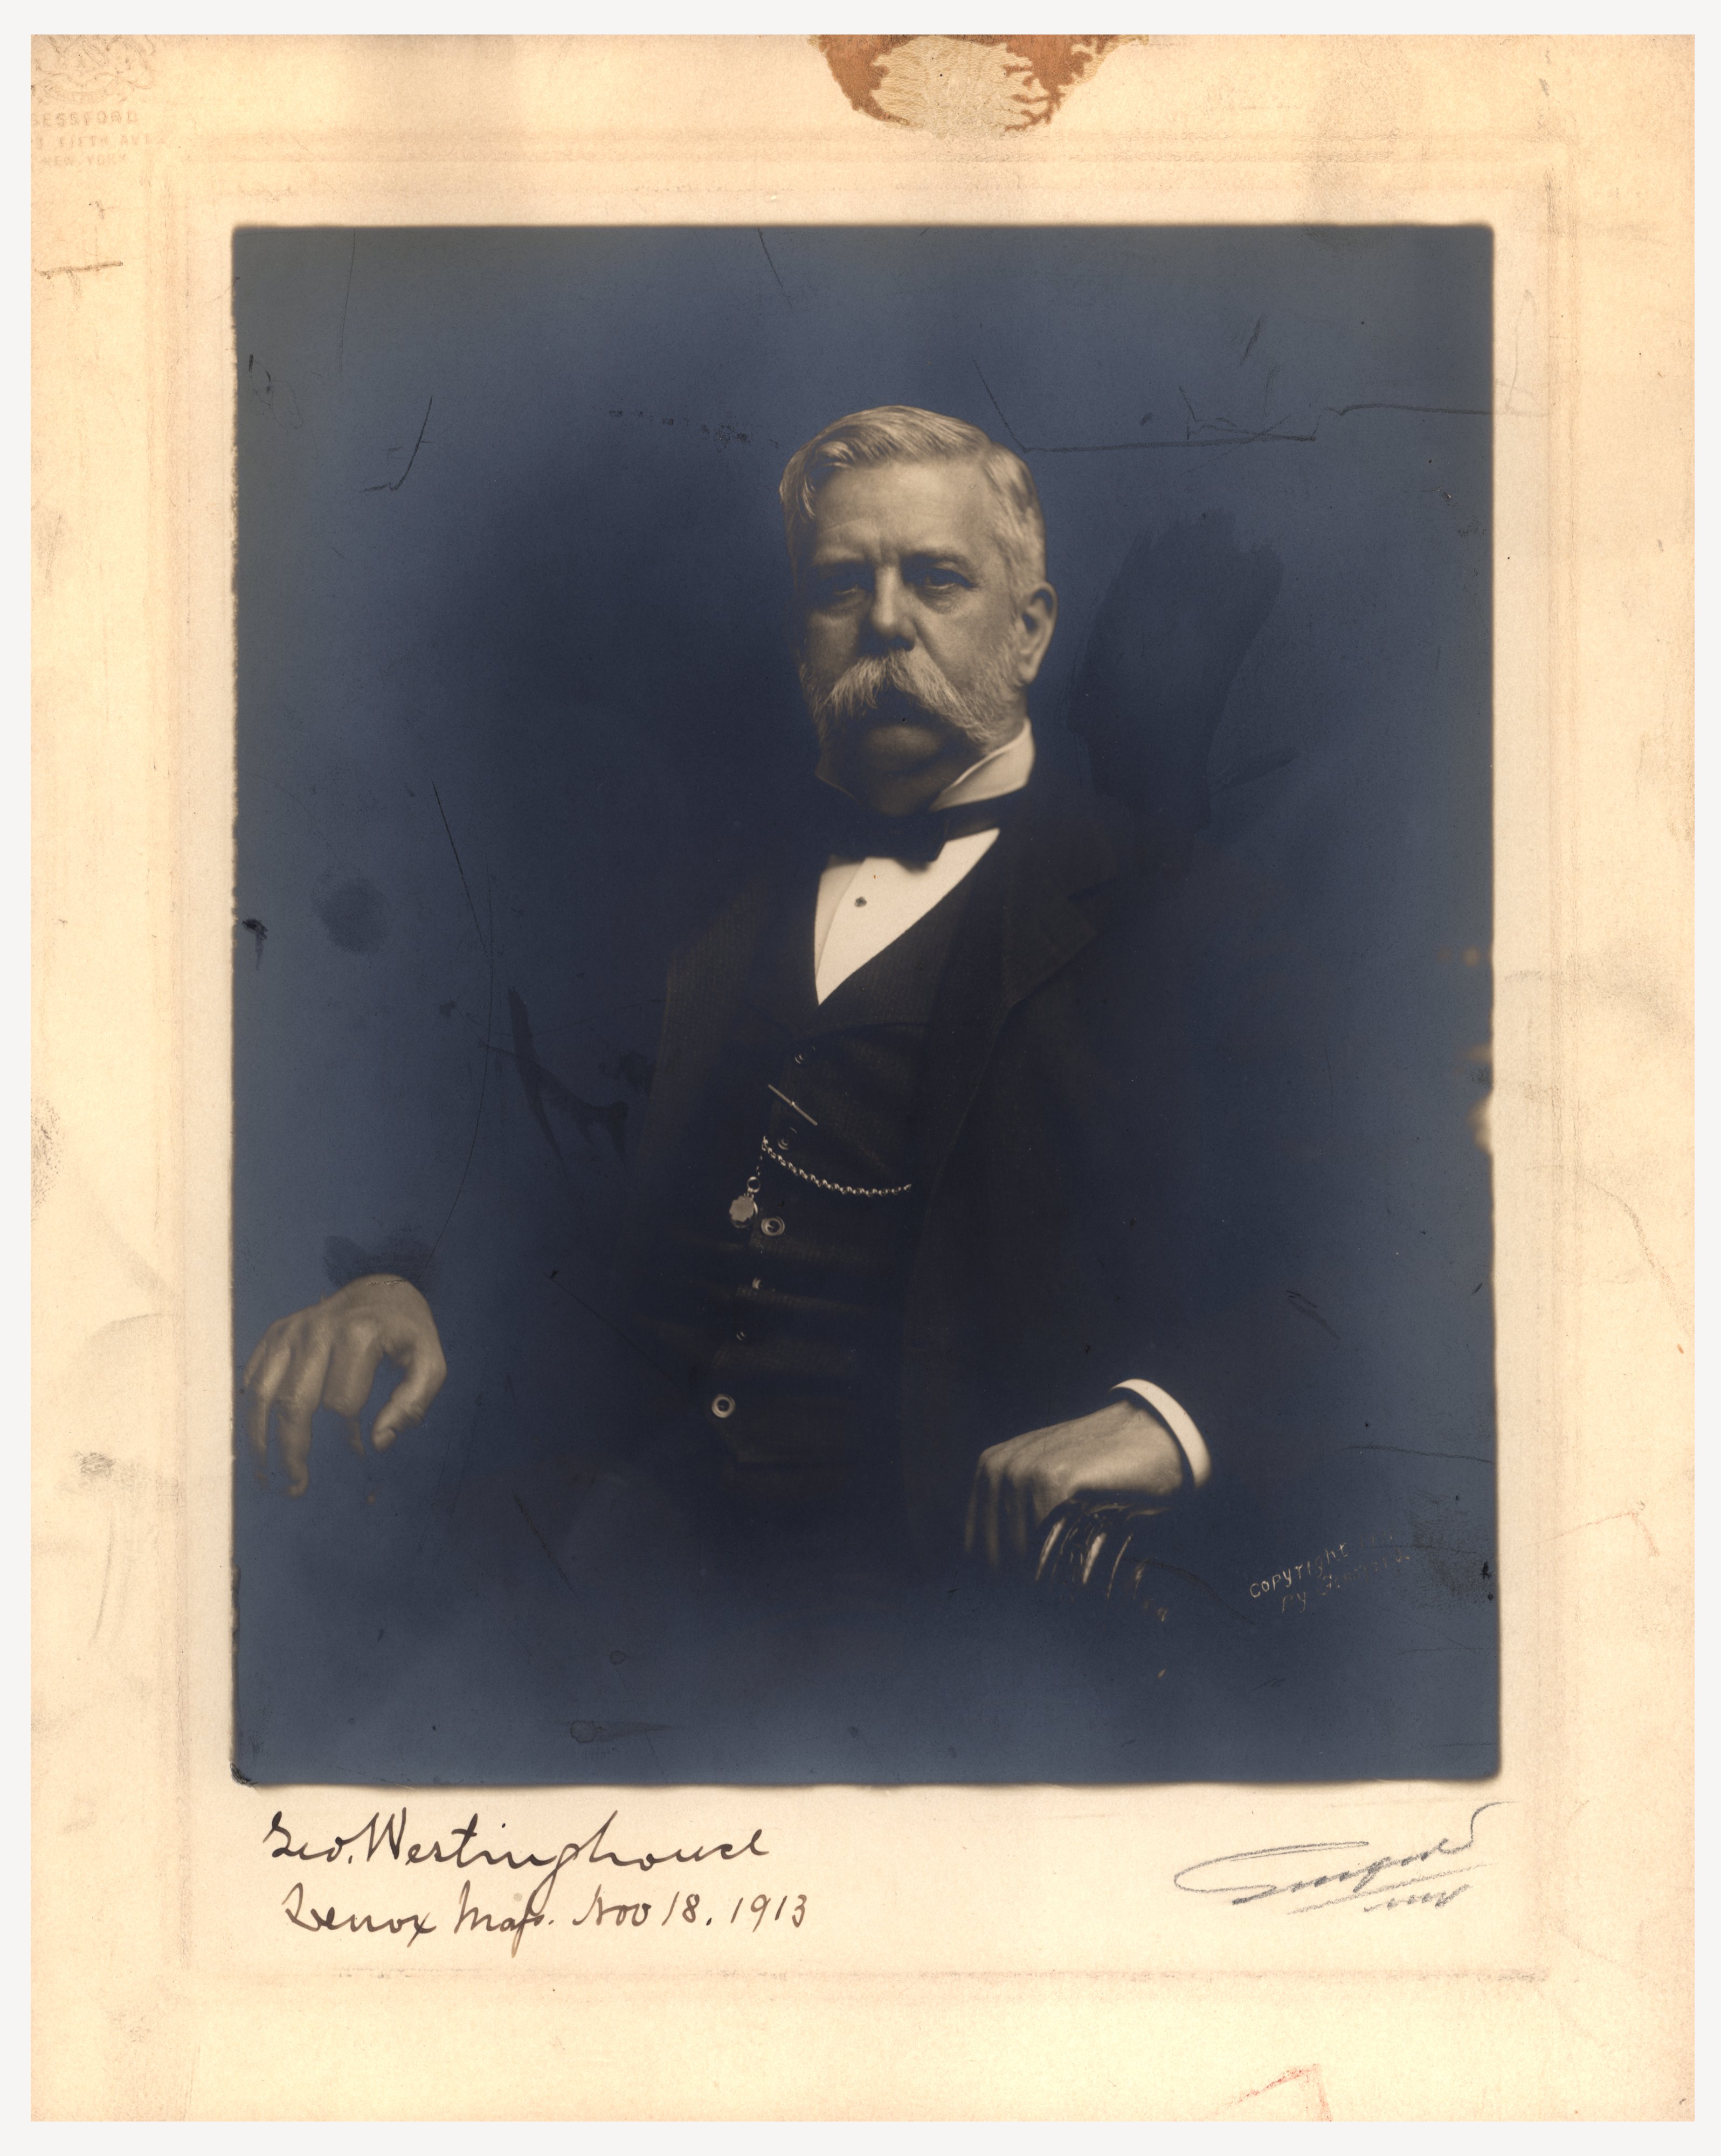 Portrait of George Westinghouse, autographed and dated 